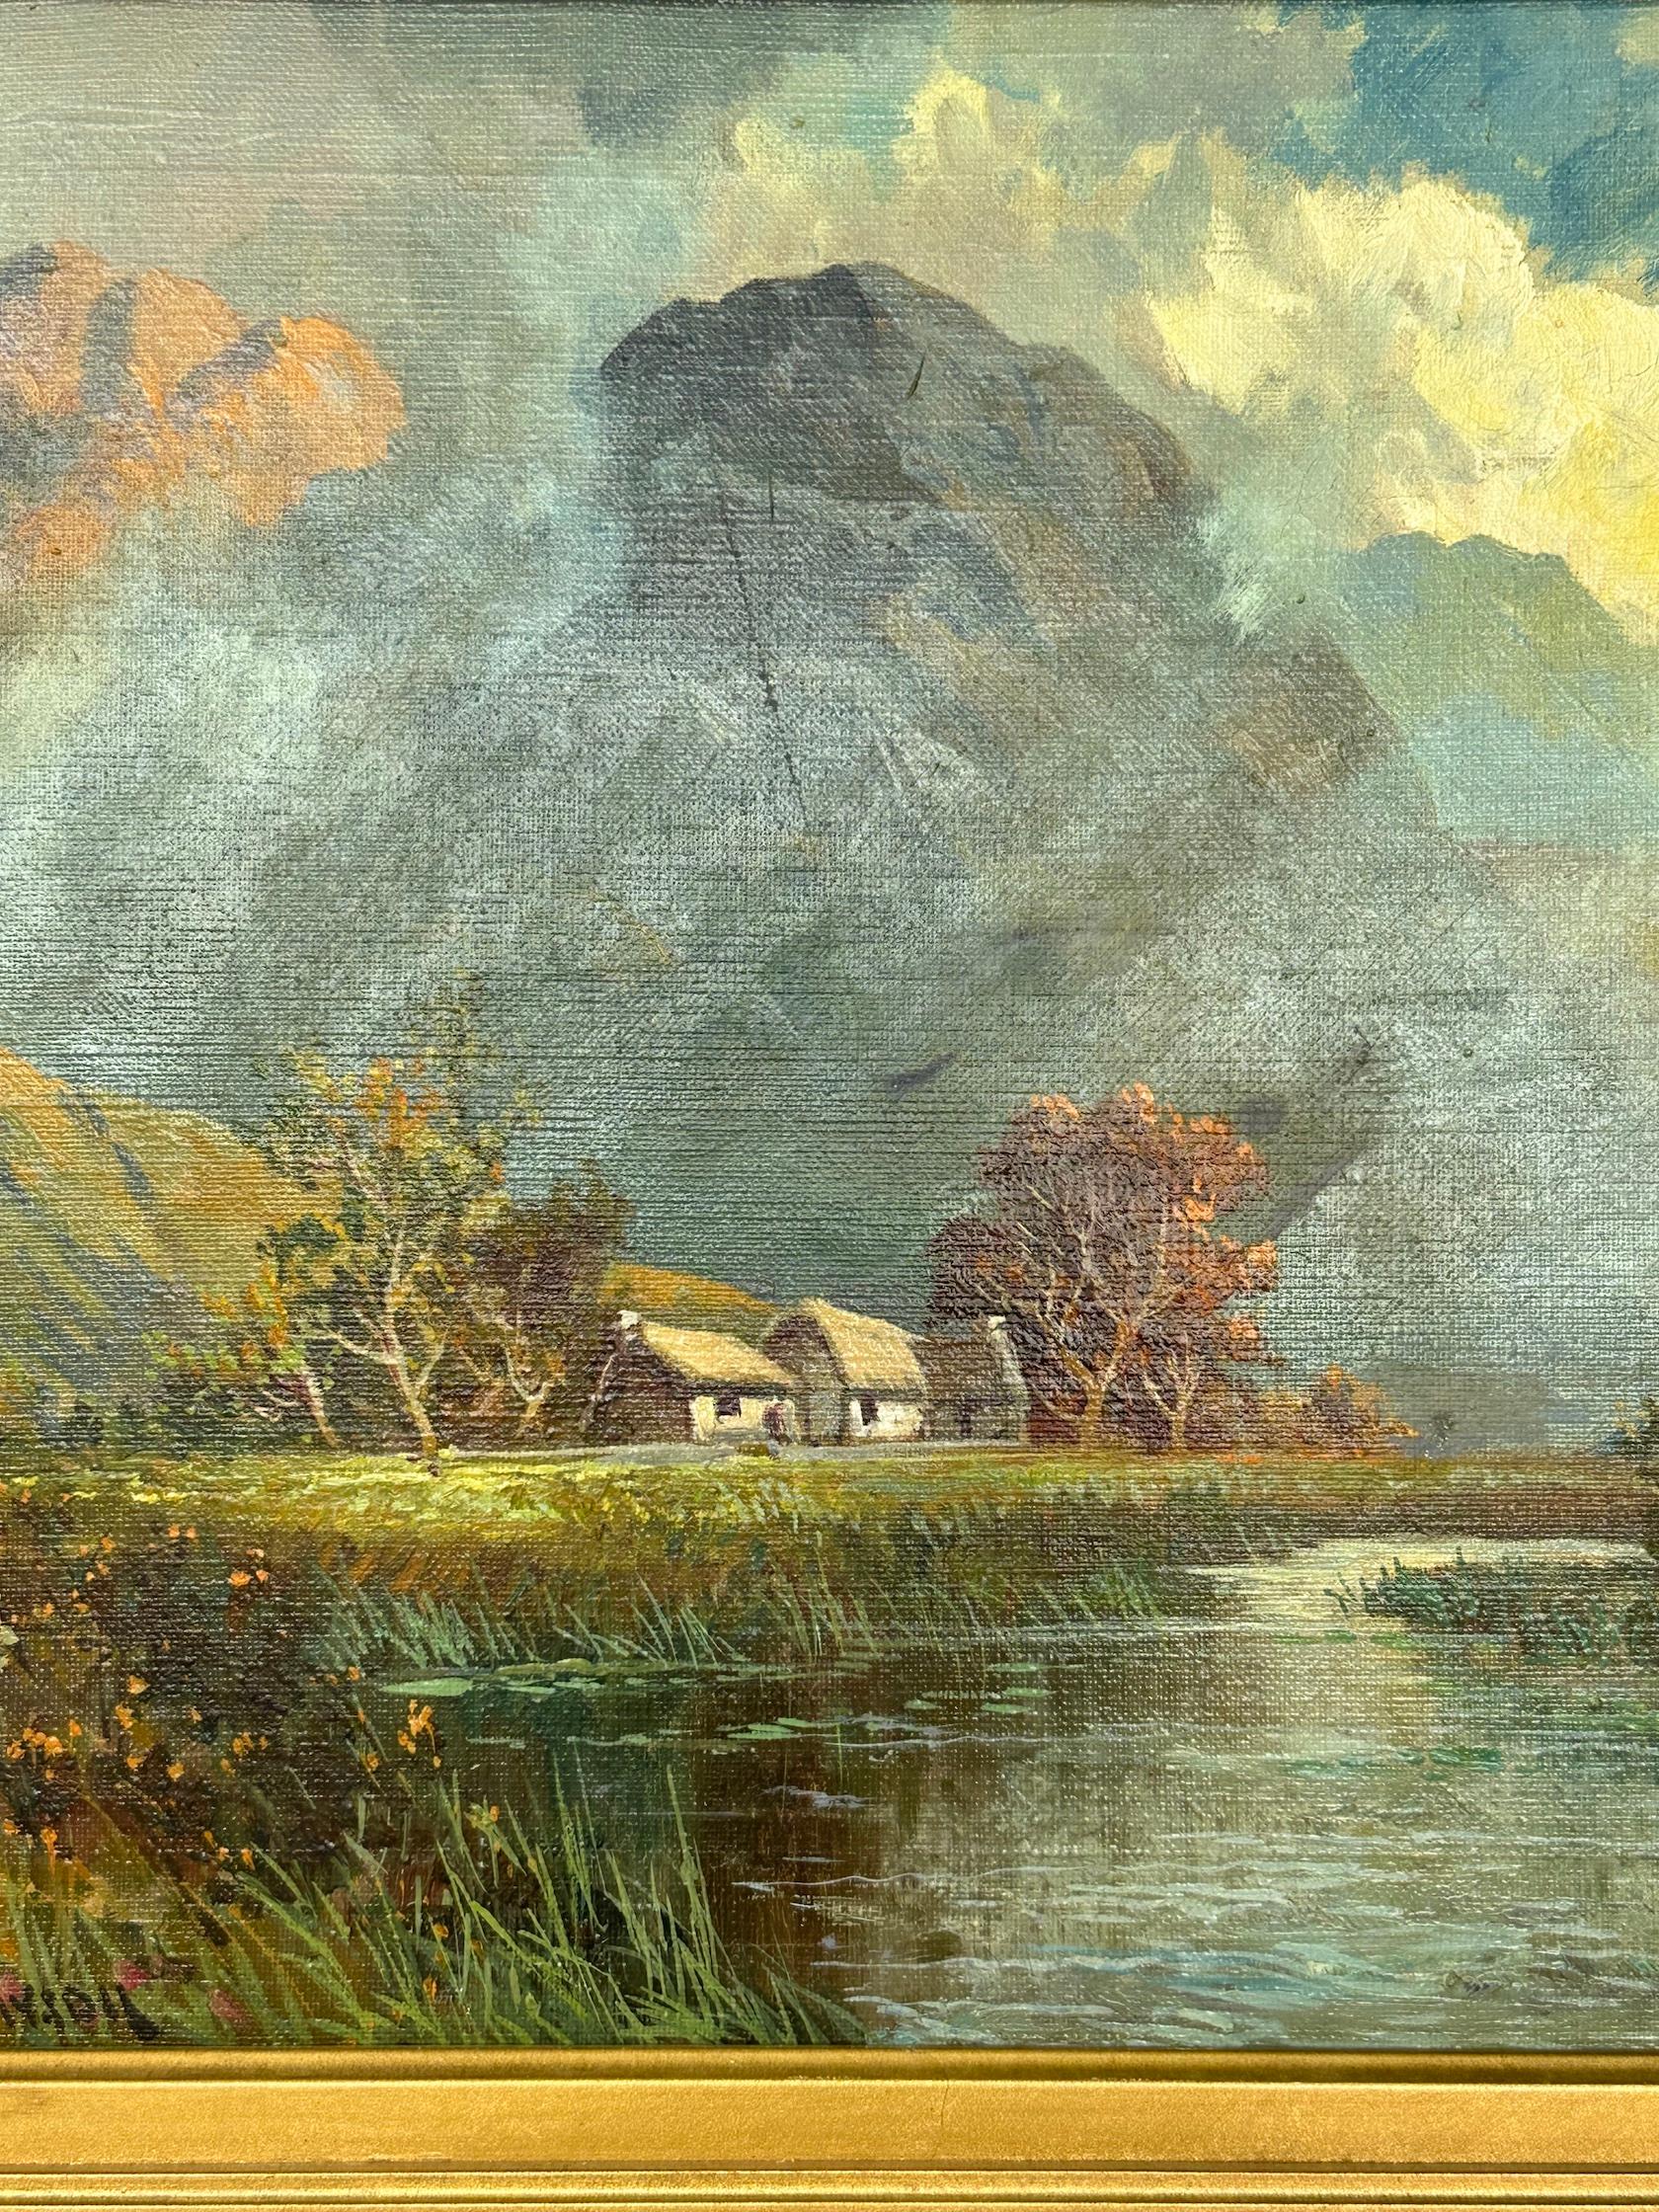 Antique Scottish Highland Loch landscape, with sunlit streaming onto the water - Victorian Painting by Francis E. Jamieson